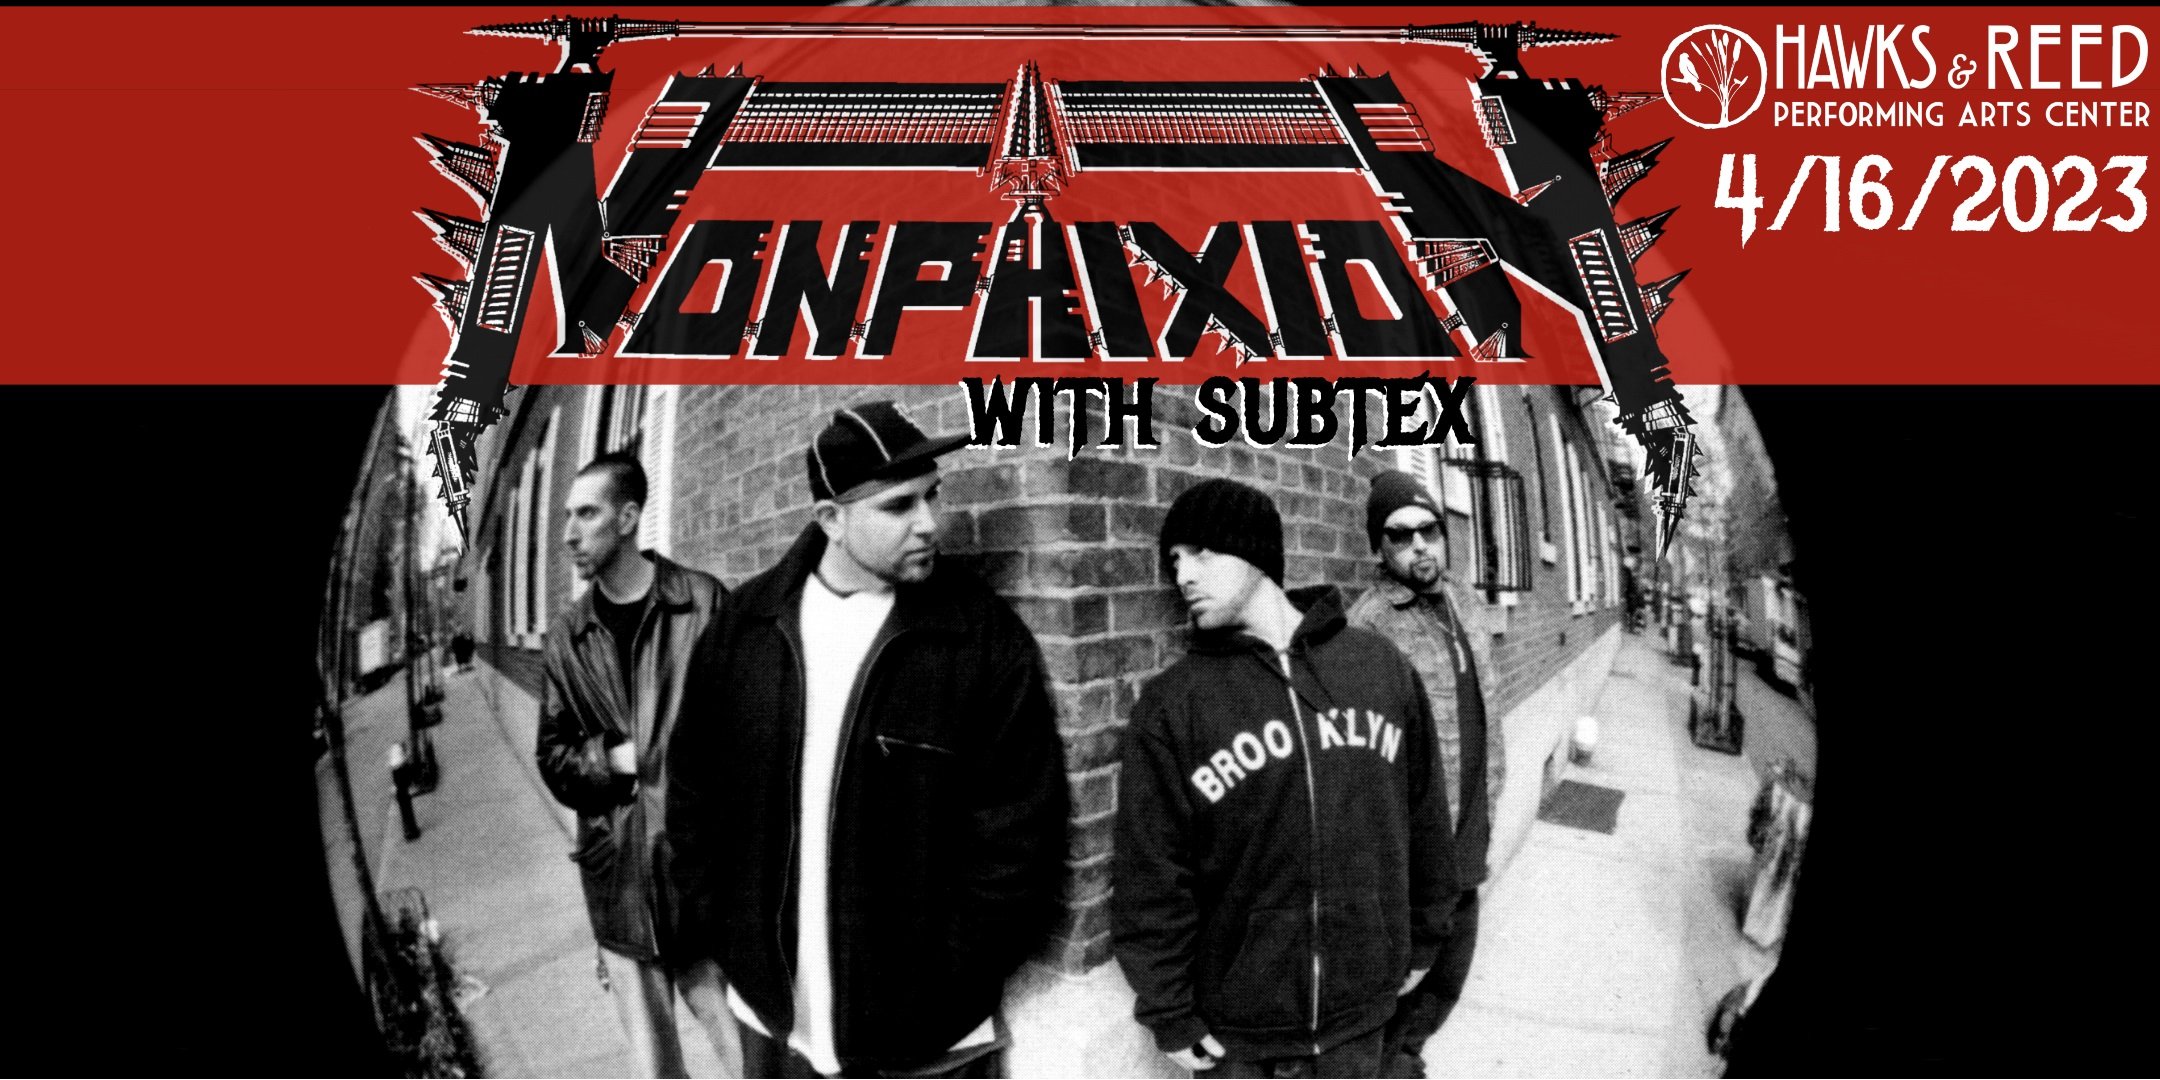 Non Phixion with Subtex at Hawks & Reed